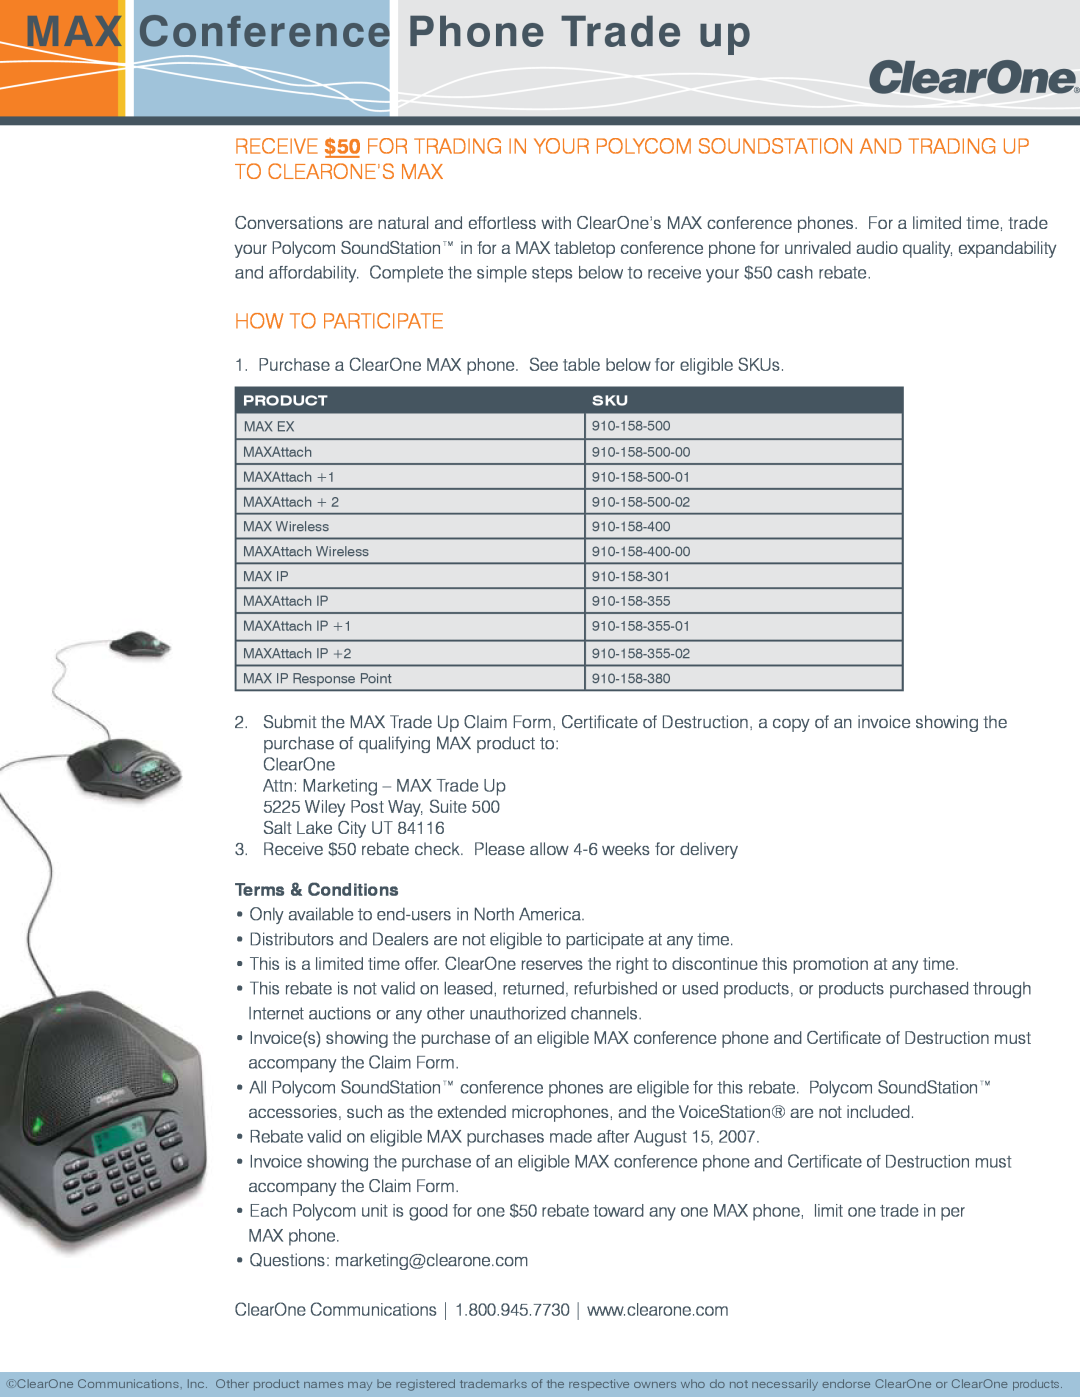 ClearOne comm MAXAttach IP +2, MAXAttach +1 manual MAX Conference Phone Trade up, How To Participate, Terms & Conditions 